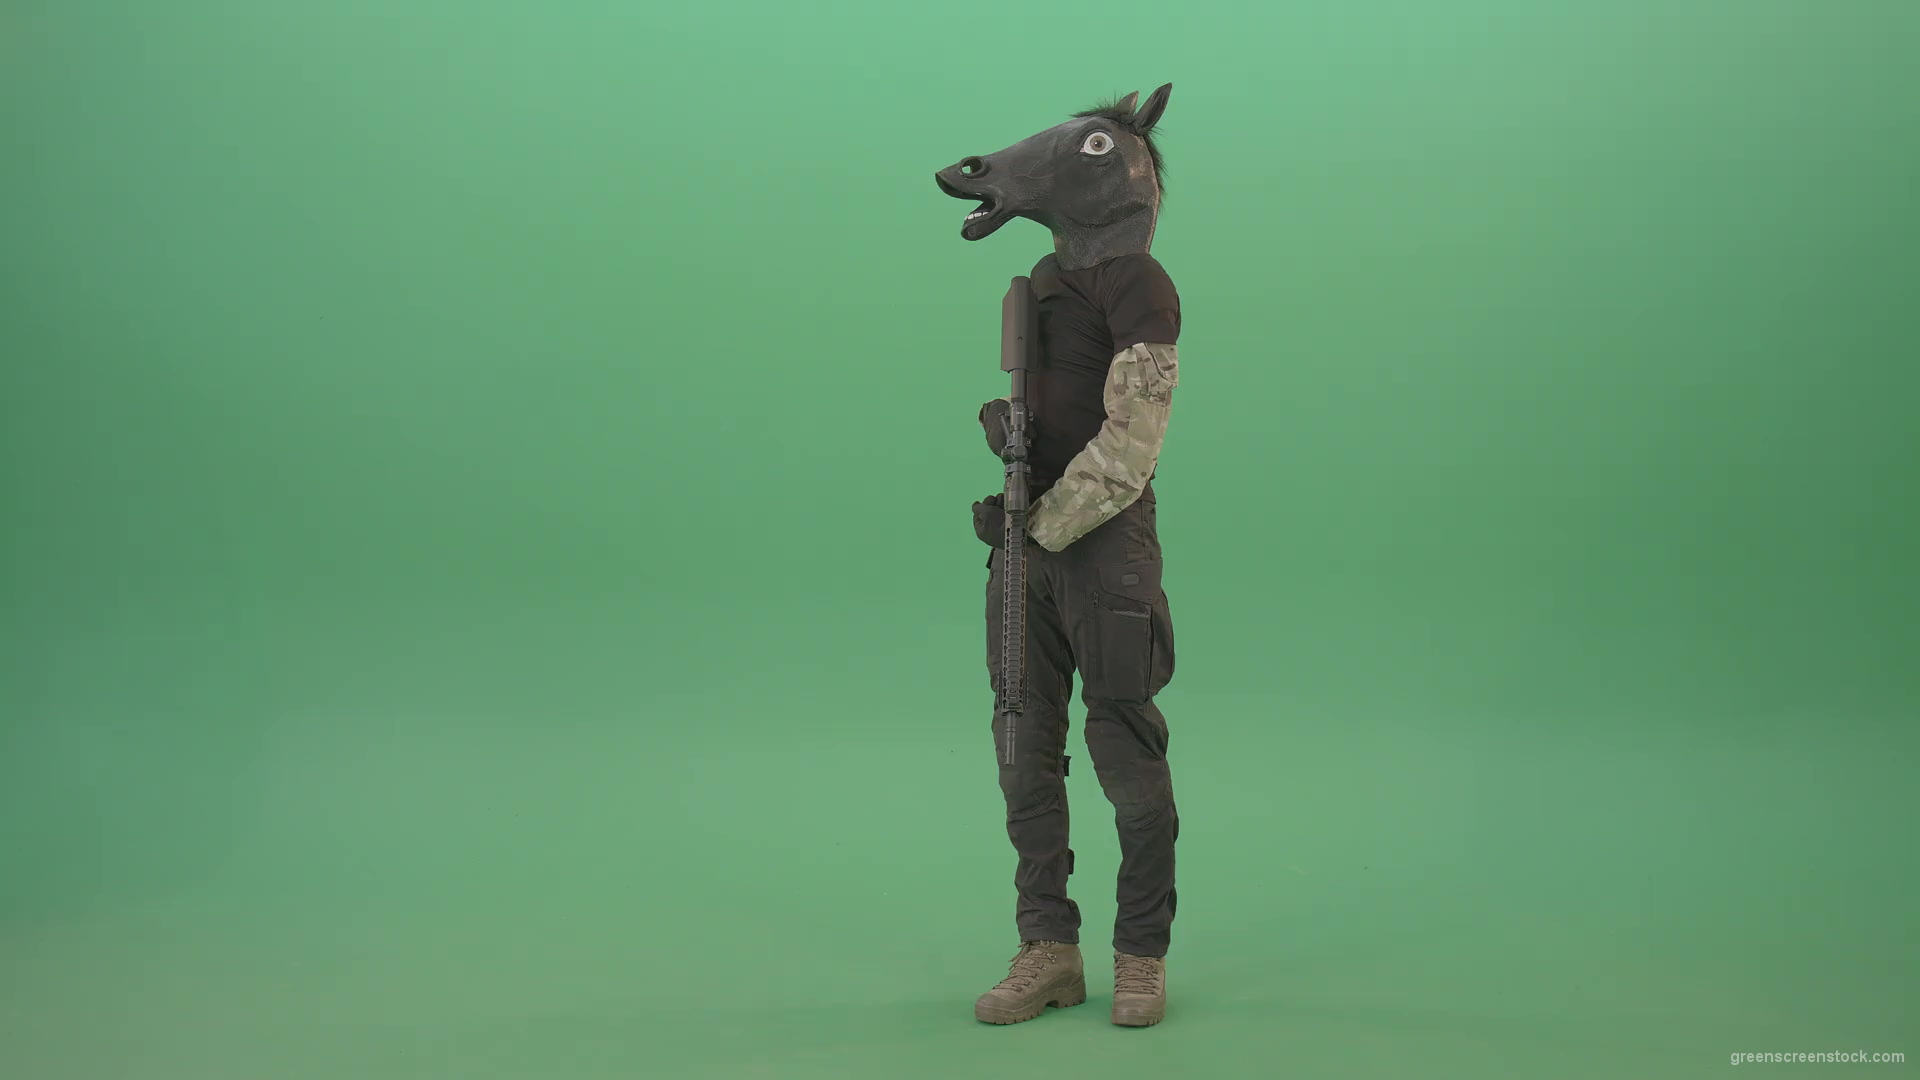 Funny-Army-Horse-Man-shooting-animals-on-Green-Screen-from-Machine-Gun-4K-Video-Footage-1920_001 Green Screen Stock